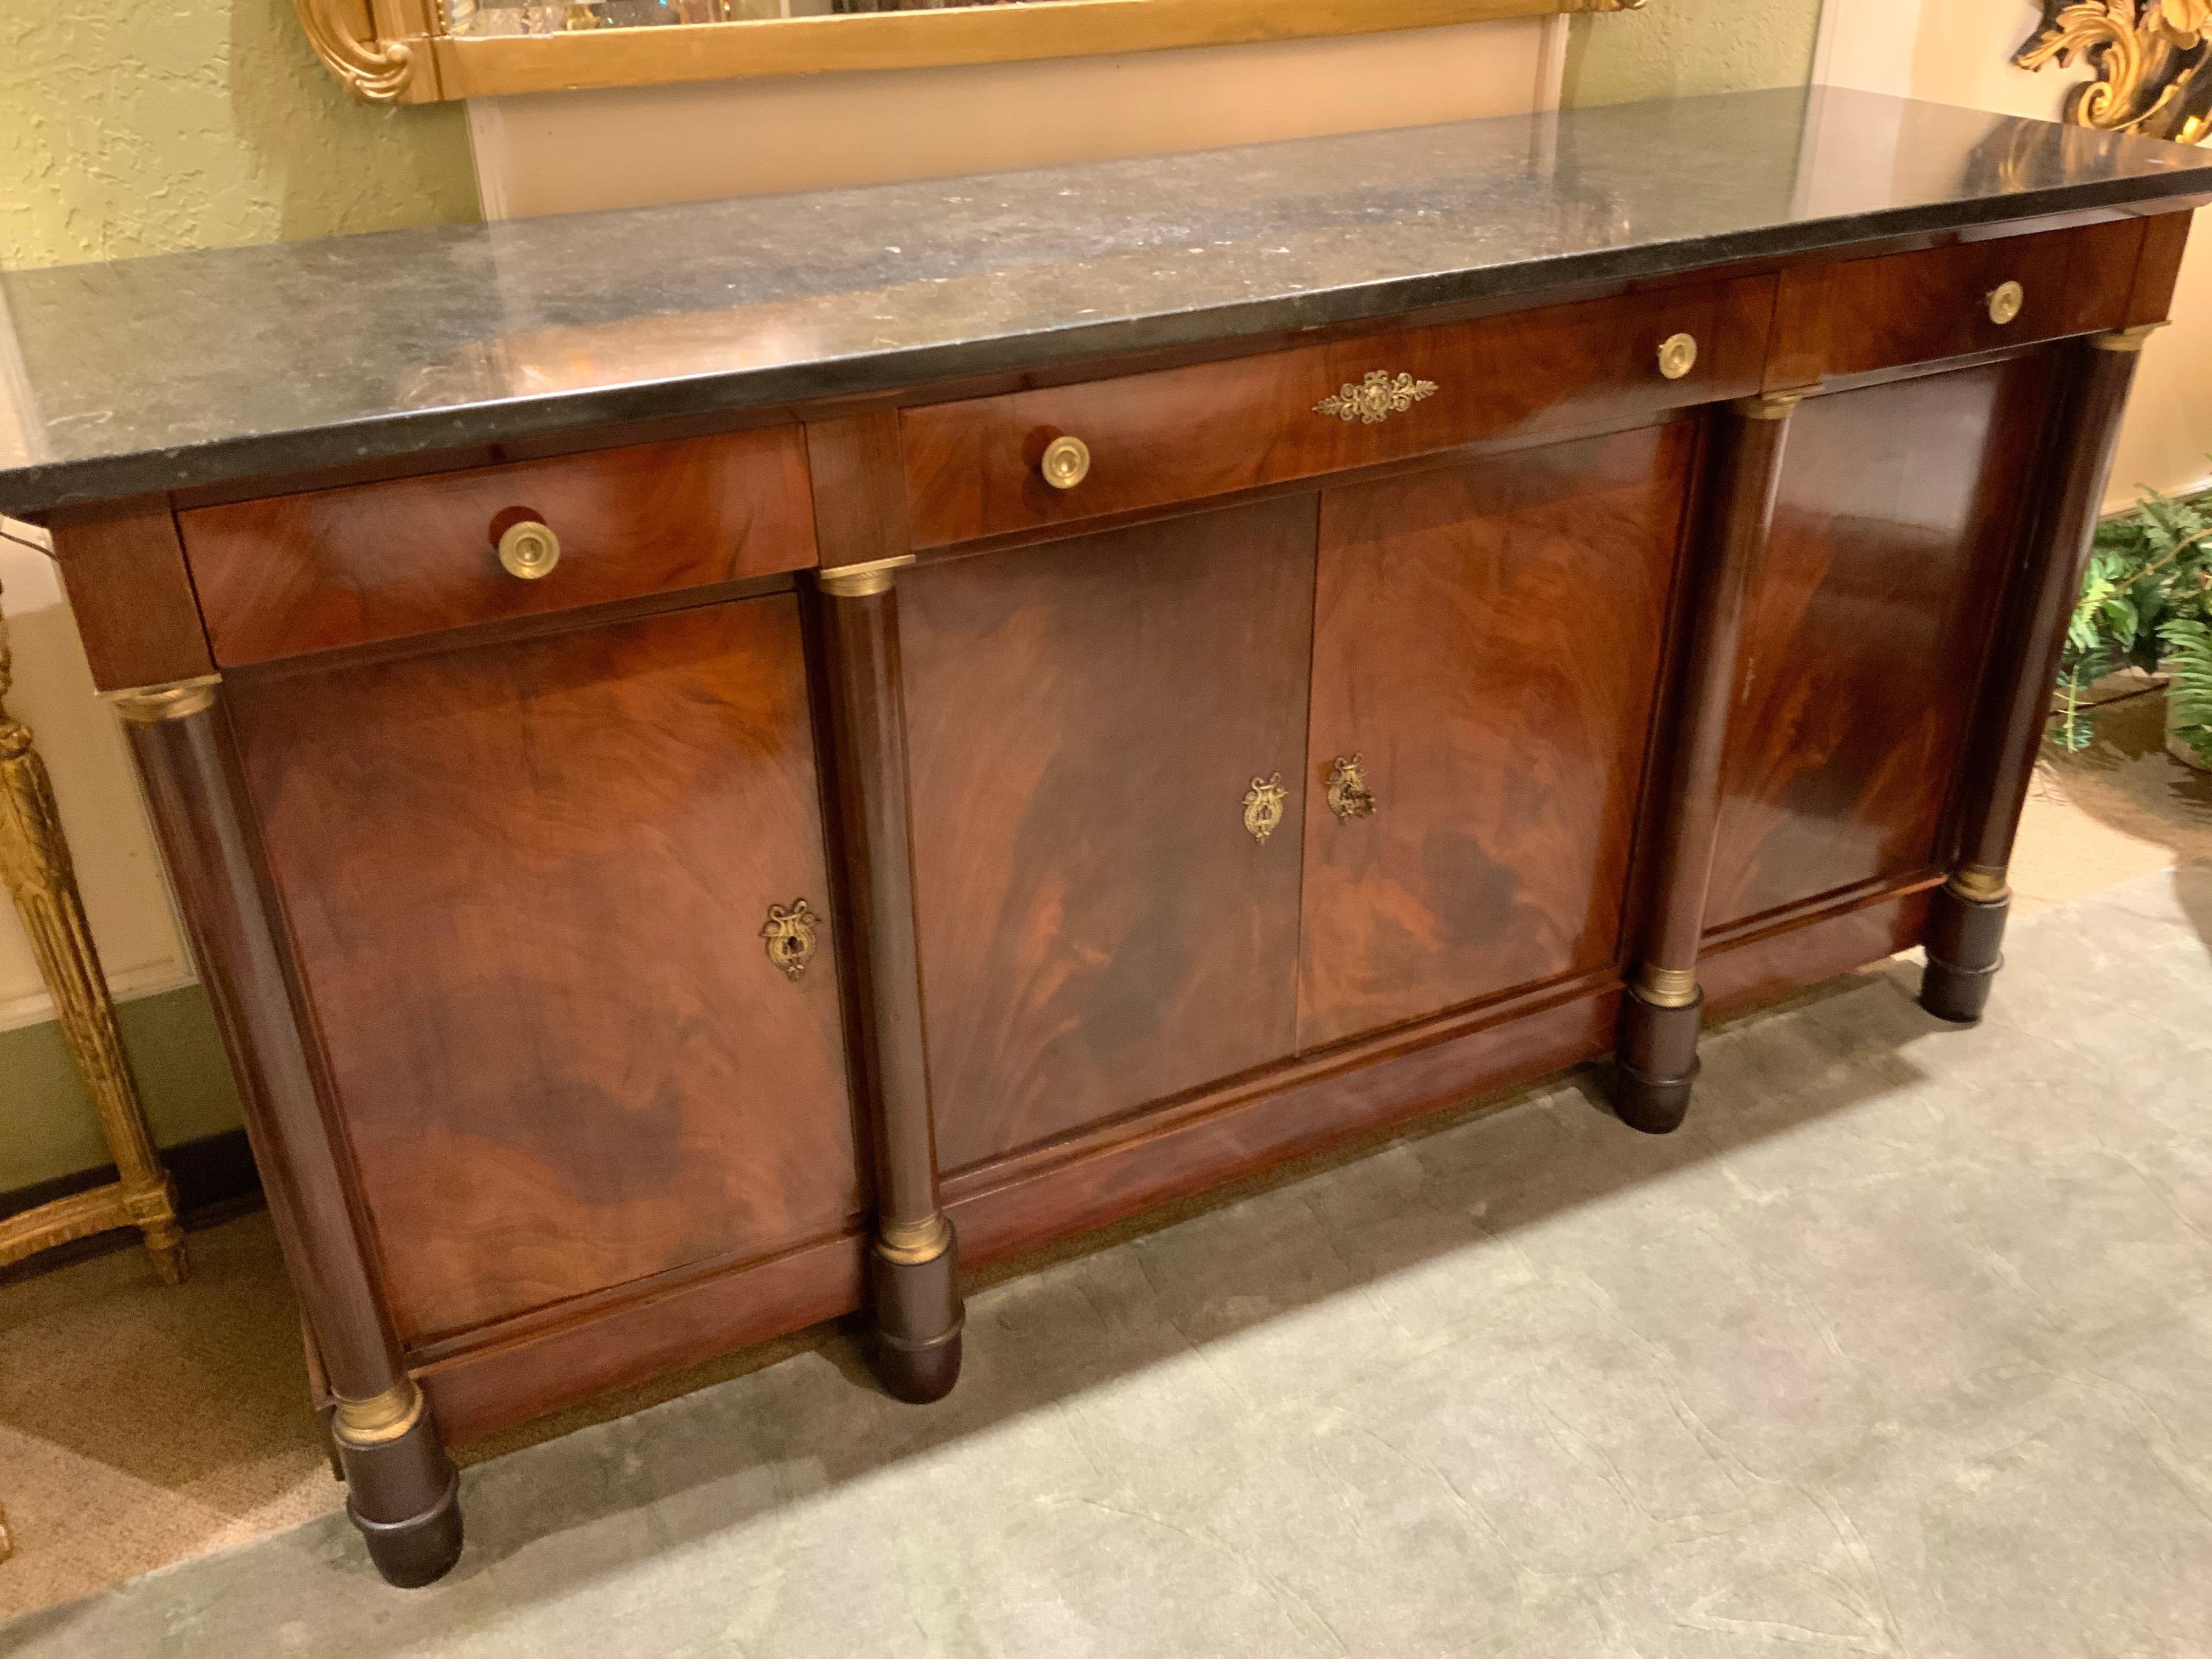 20th Century French Empire Style Marble-Top Mahogany Sideboard/Buffet